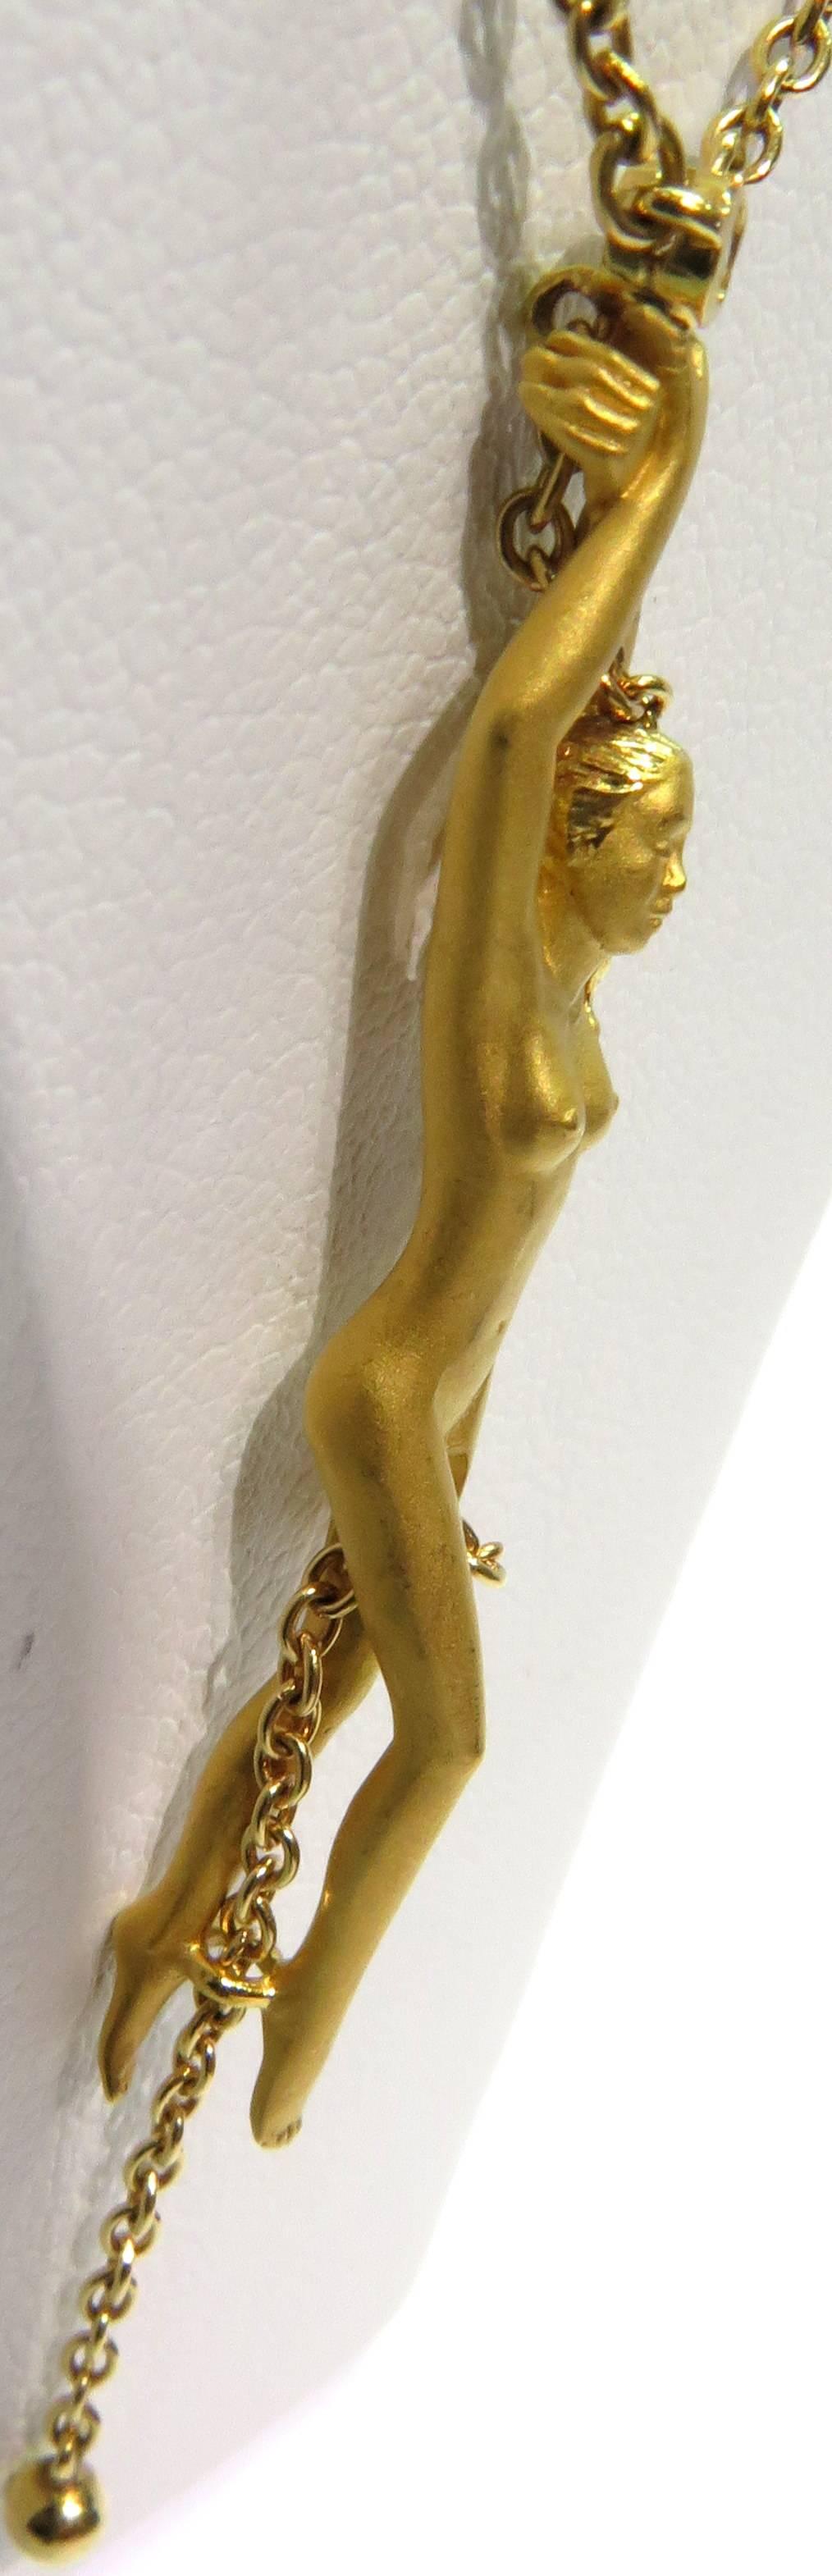 This is a wonderful example of how Carrera y Carrera shows the gracefullness in each piece. This 18k yellow gold nude is my favorite form that Carrera y Carrera makes. The chain itself measures 18 inches long. The nude attached pendant measures 2